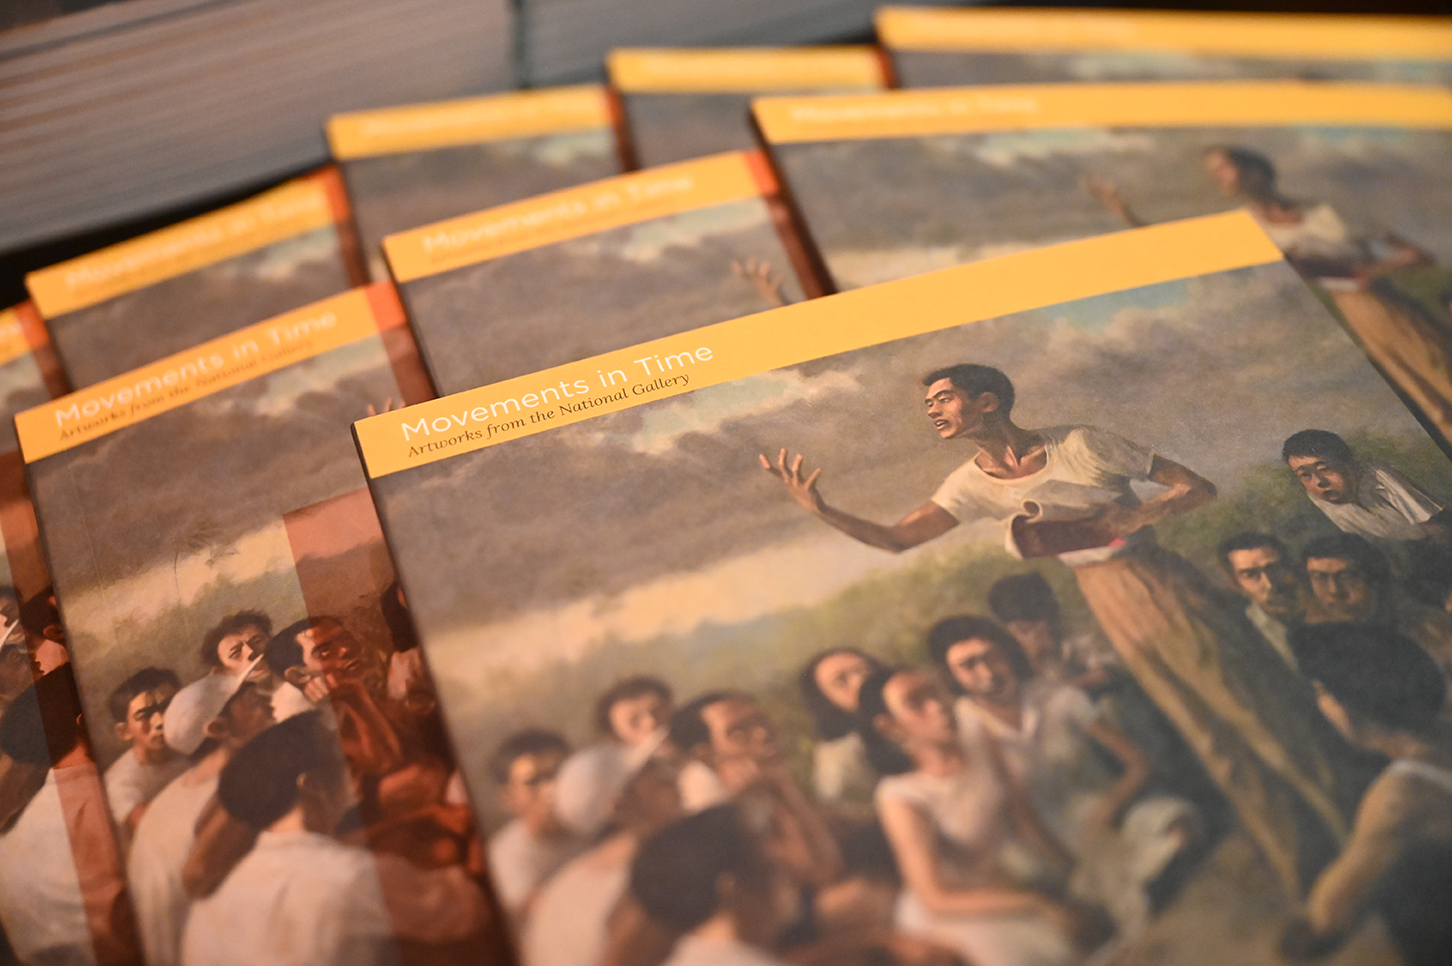 GEE for Foundation for The Arts and Social Enterprise Music Commissioning Series Commemorative Booklet